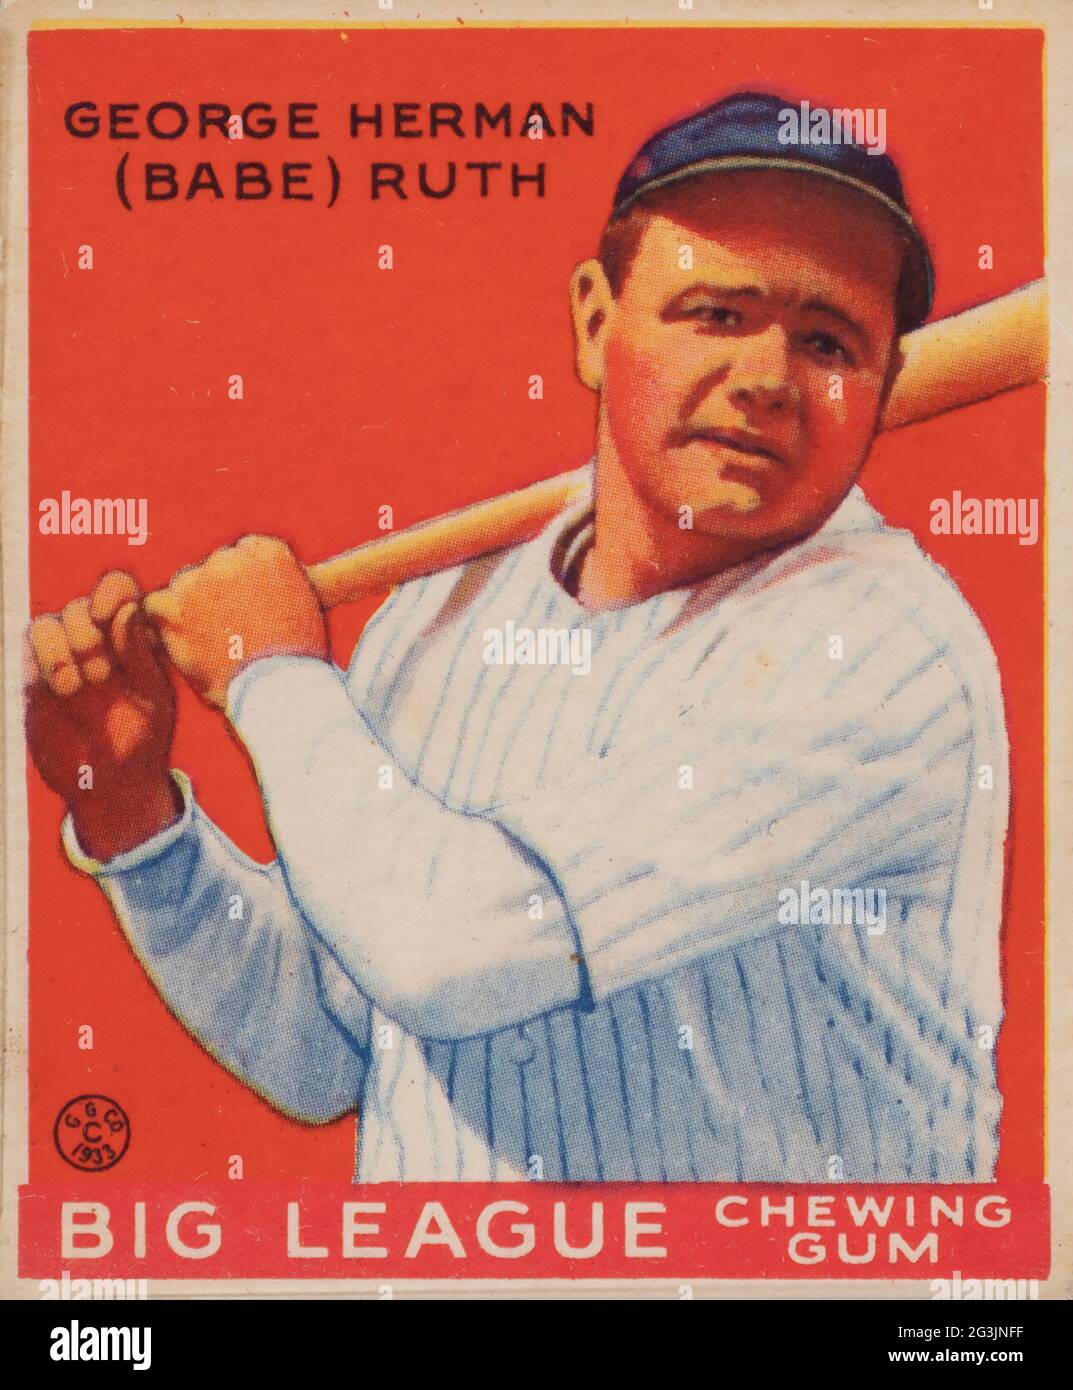 George Herman, Babe Ruth, Big Leauge Chewing Gum 1933 Stock Photo